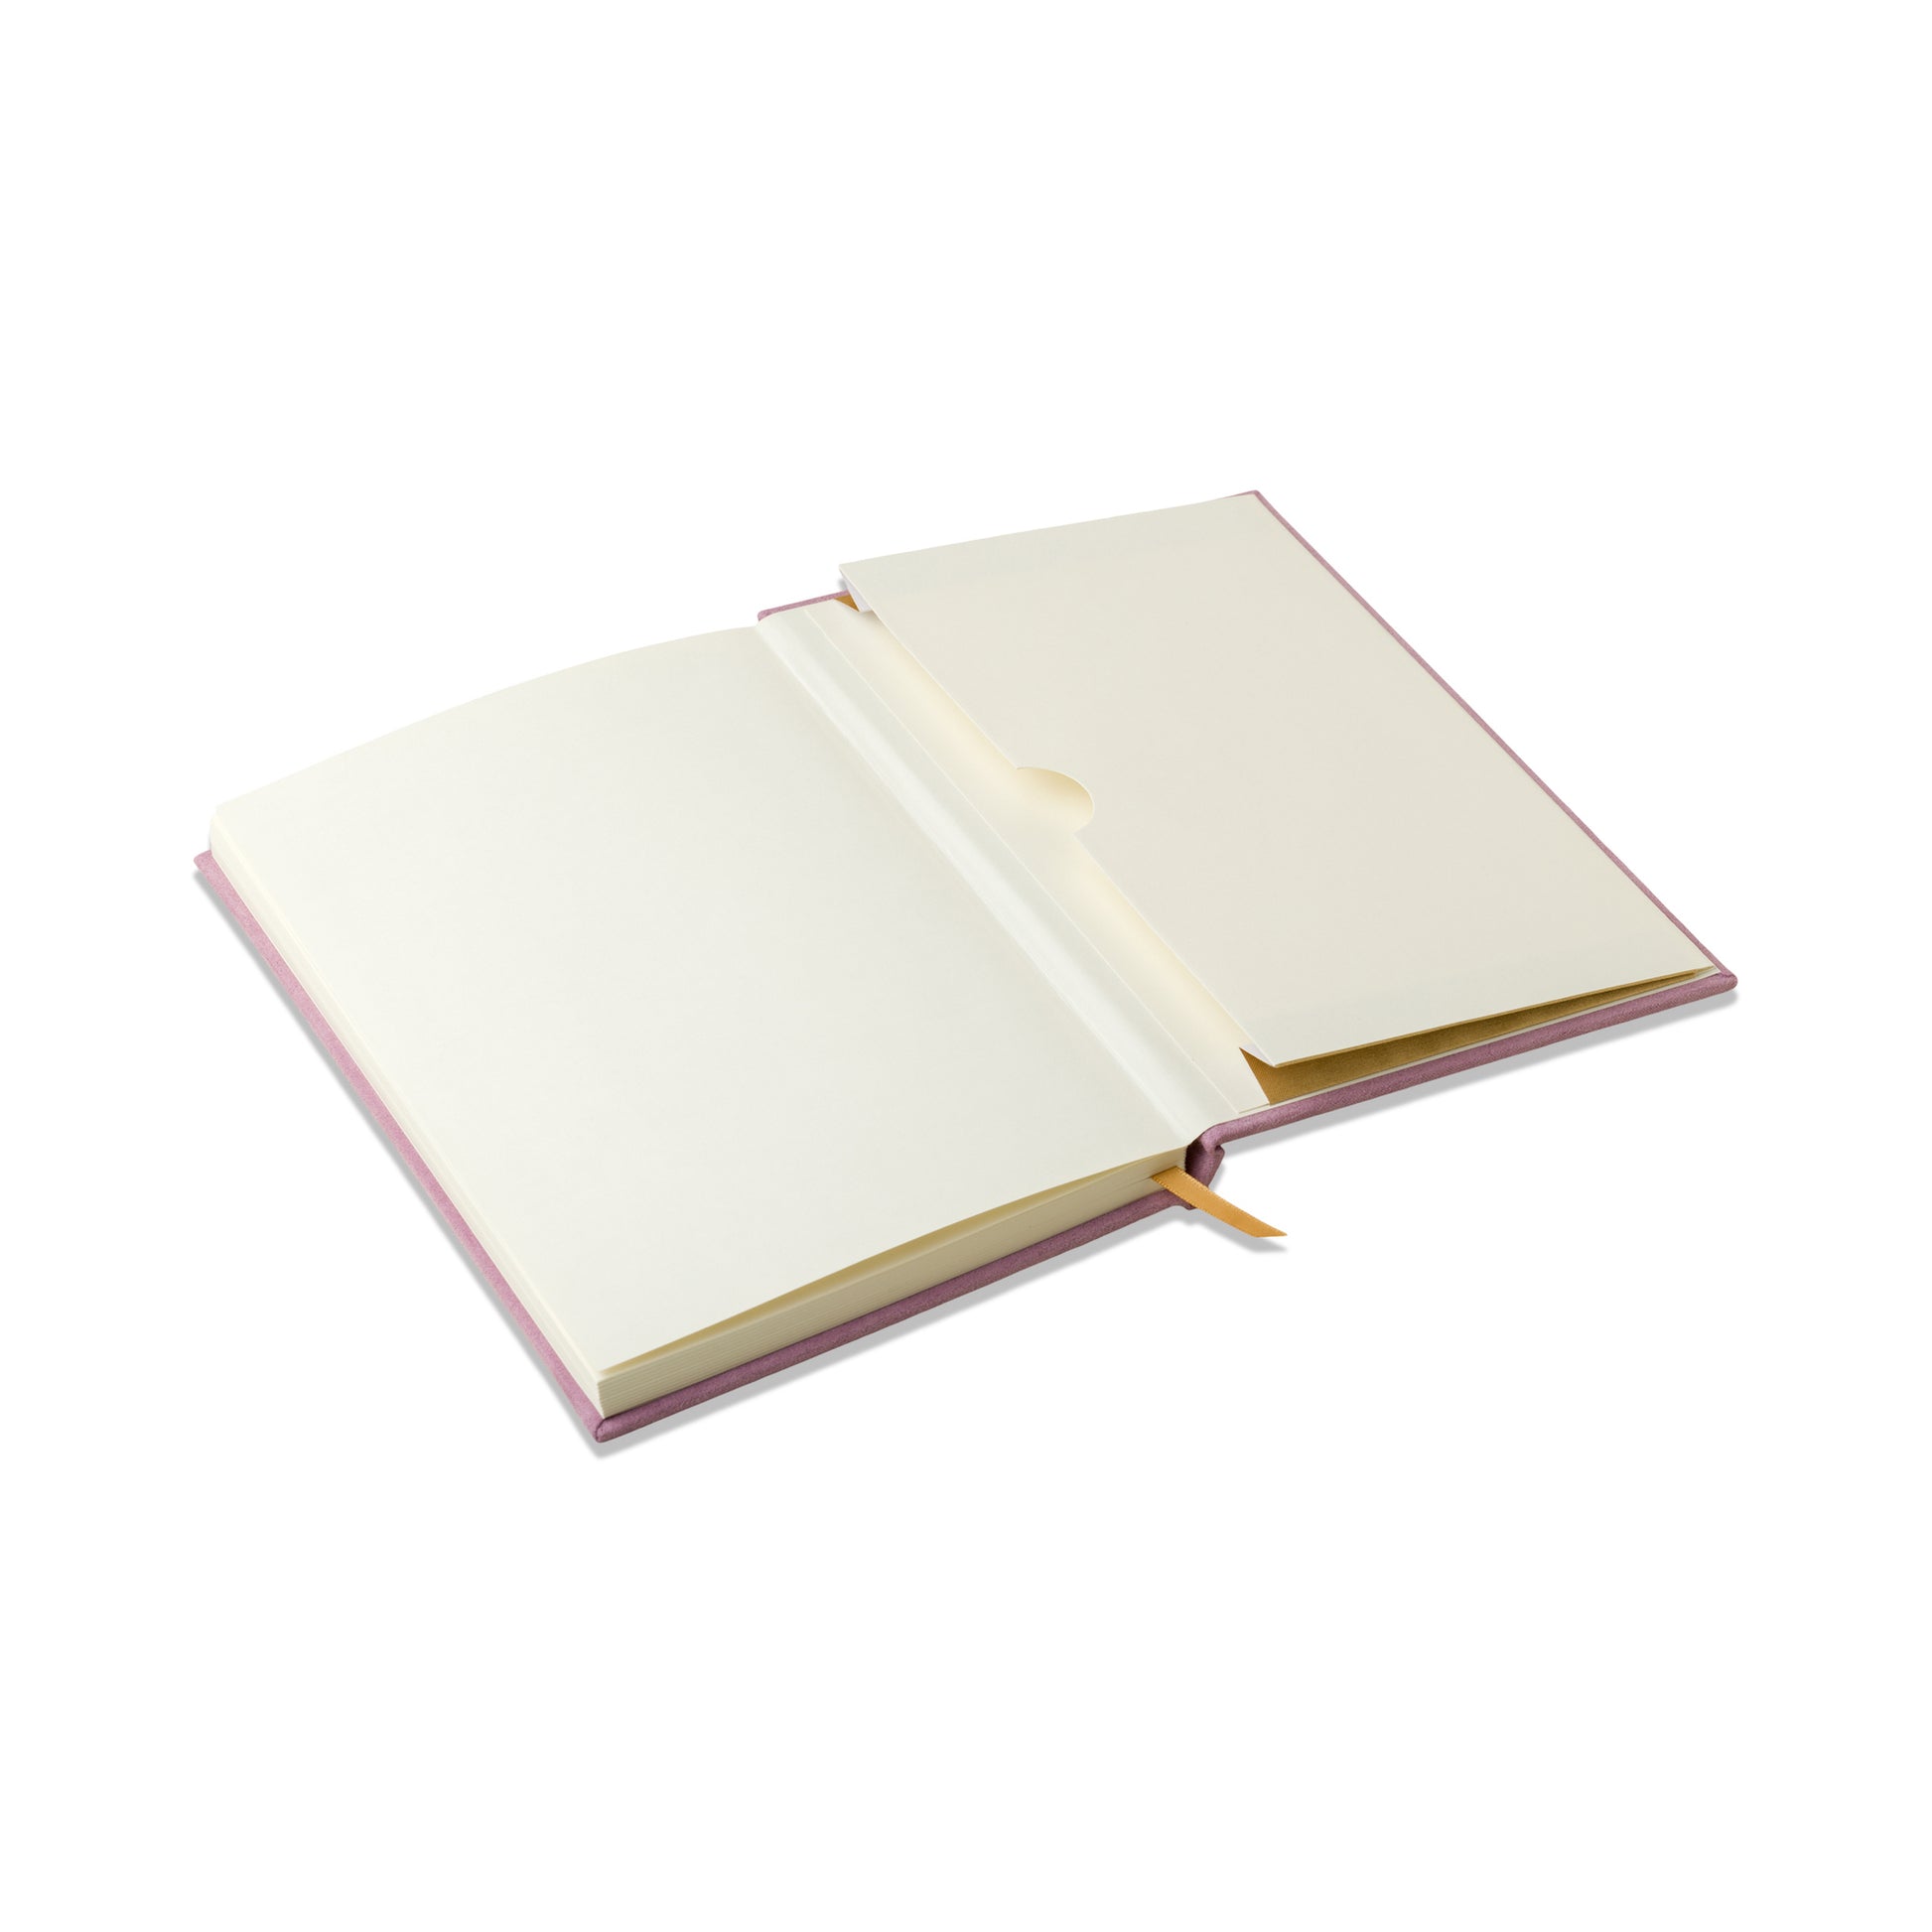 Hard Cover Suede Cloth Journal With Pocket - Notes lay flat picture with folder pocket